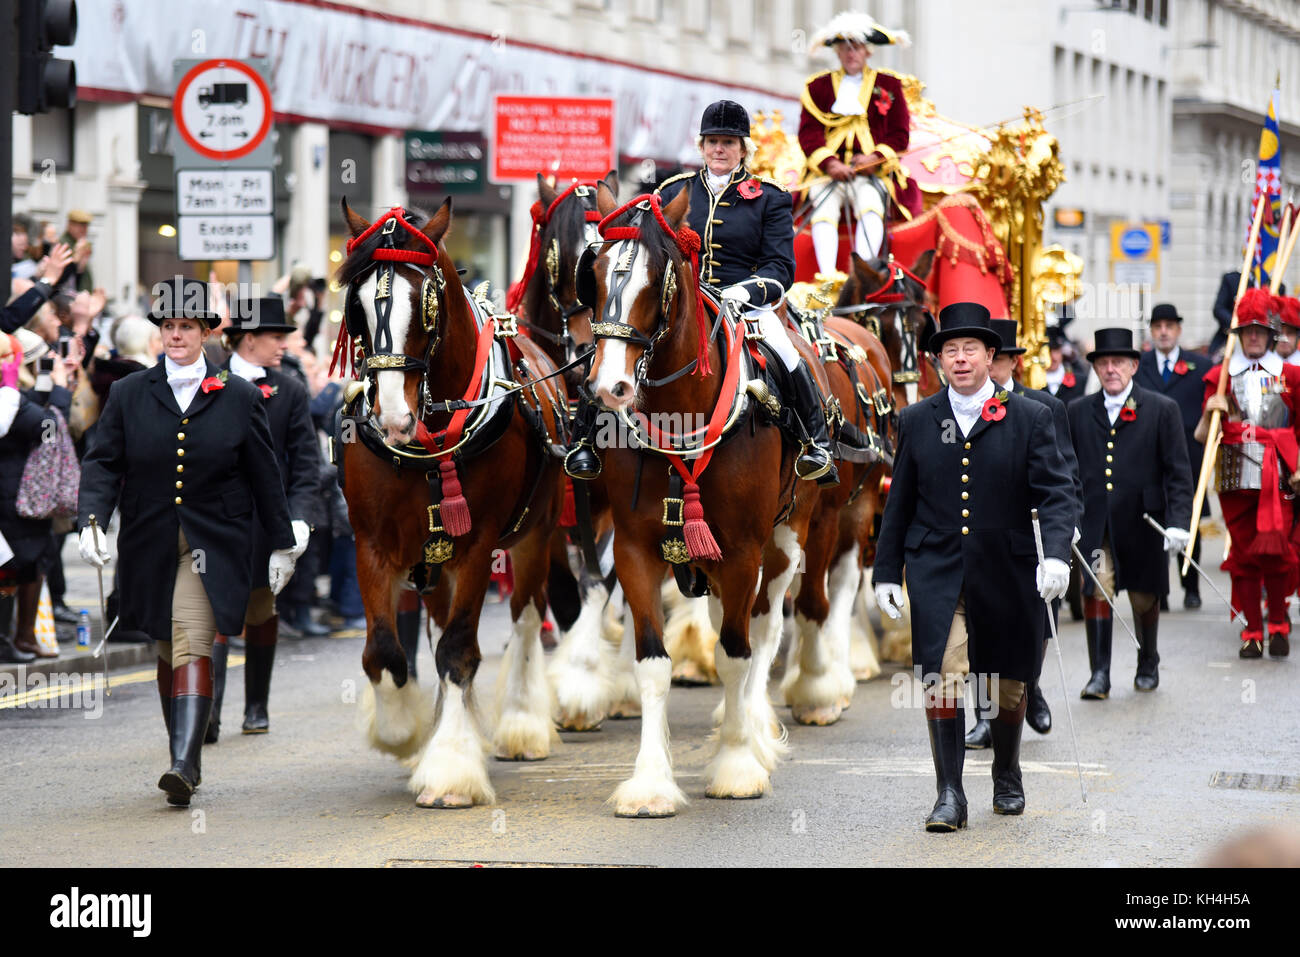 Lord Mayor's Gold State Coach und Escort bei der Lord Mayor's Show Prozession Parade entlang Cheapside, London Stockfoto